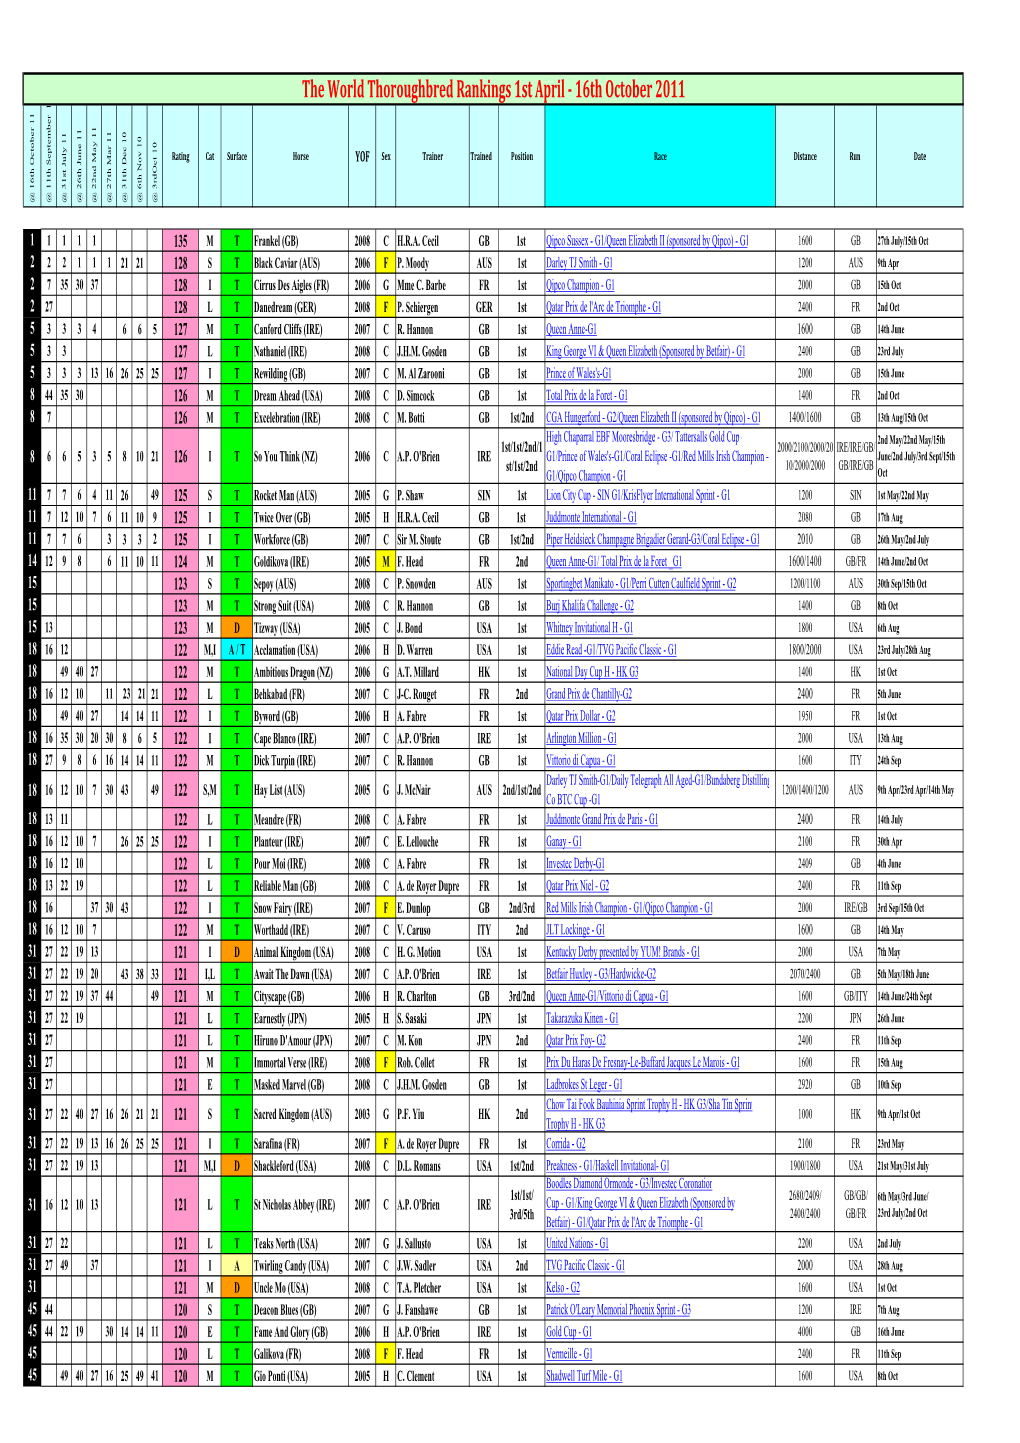 The World Thoroughbred Rankings 1St April